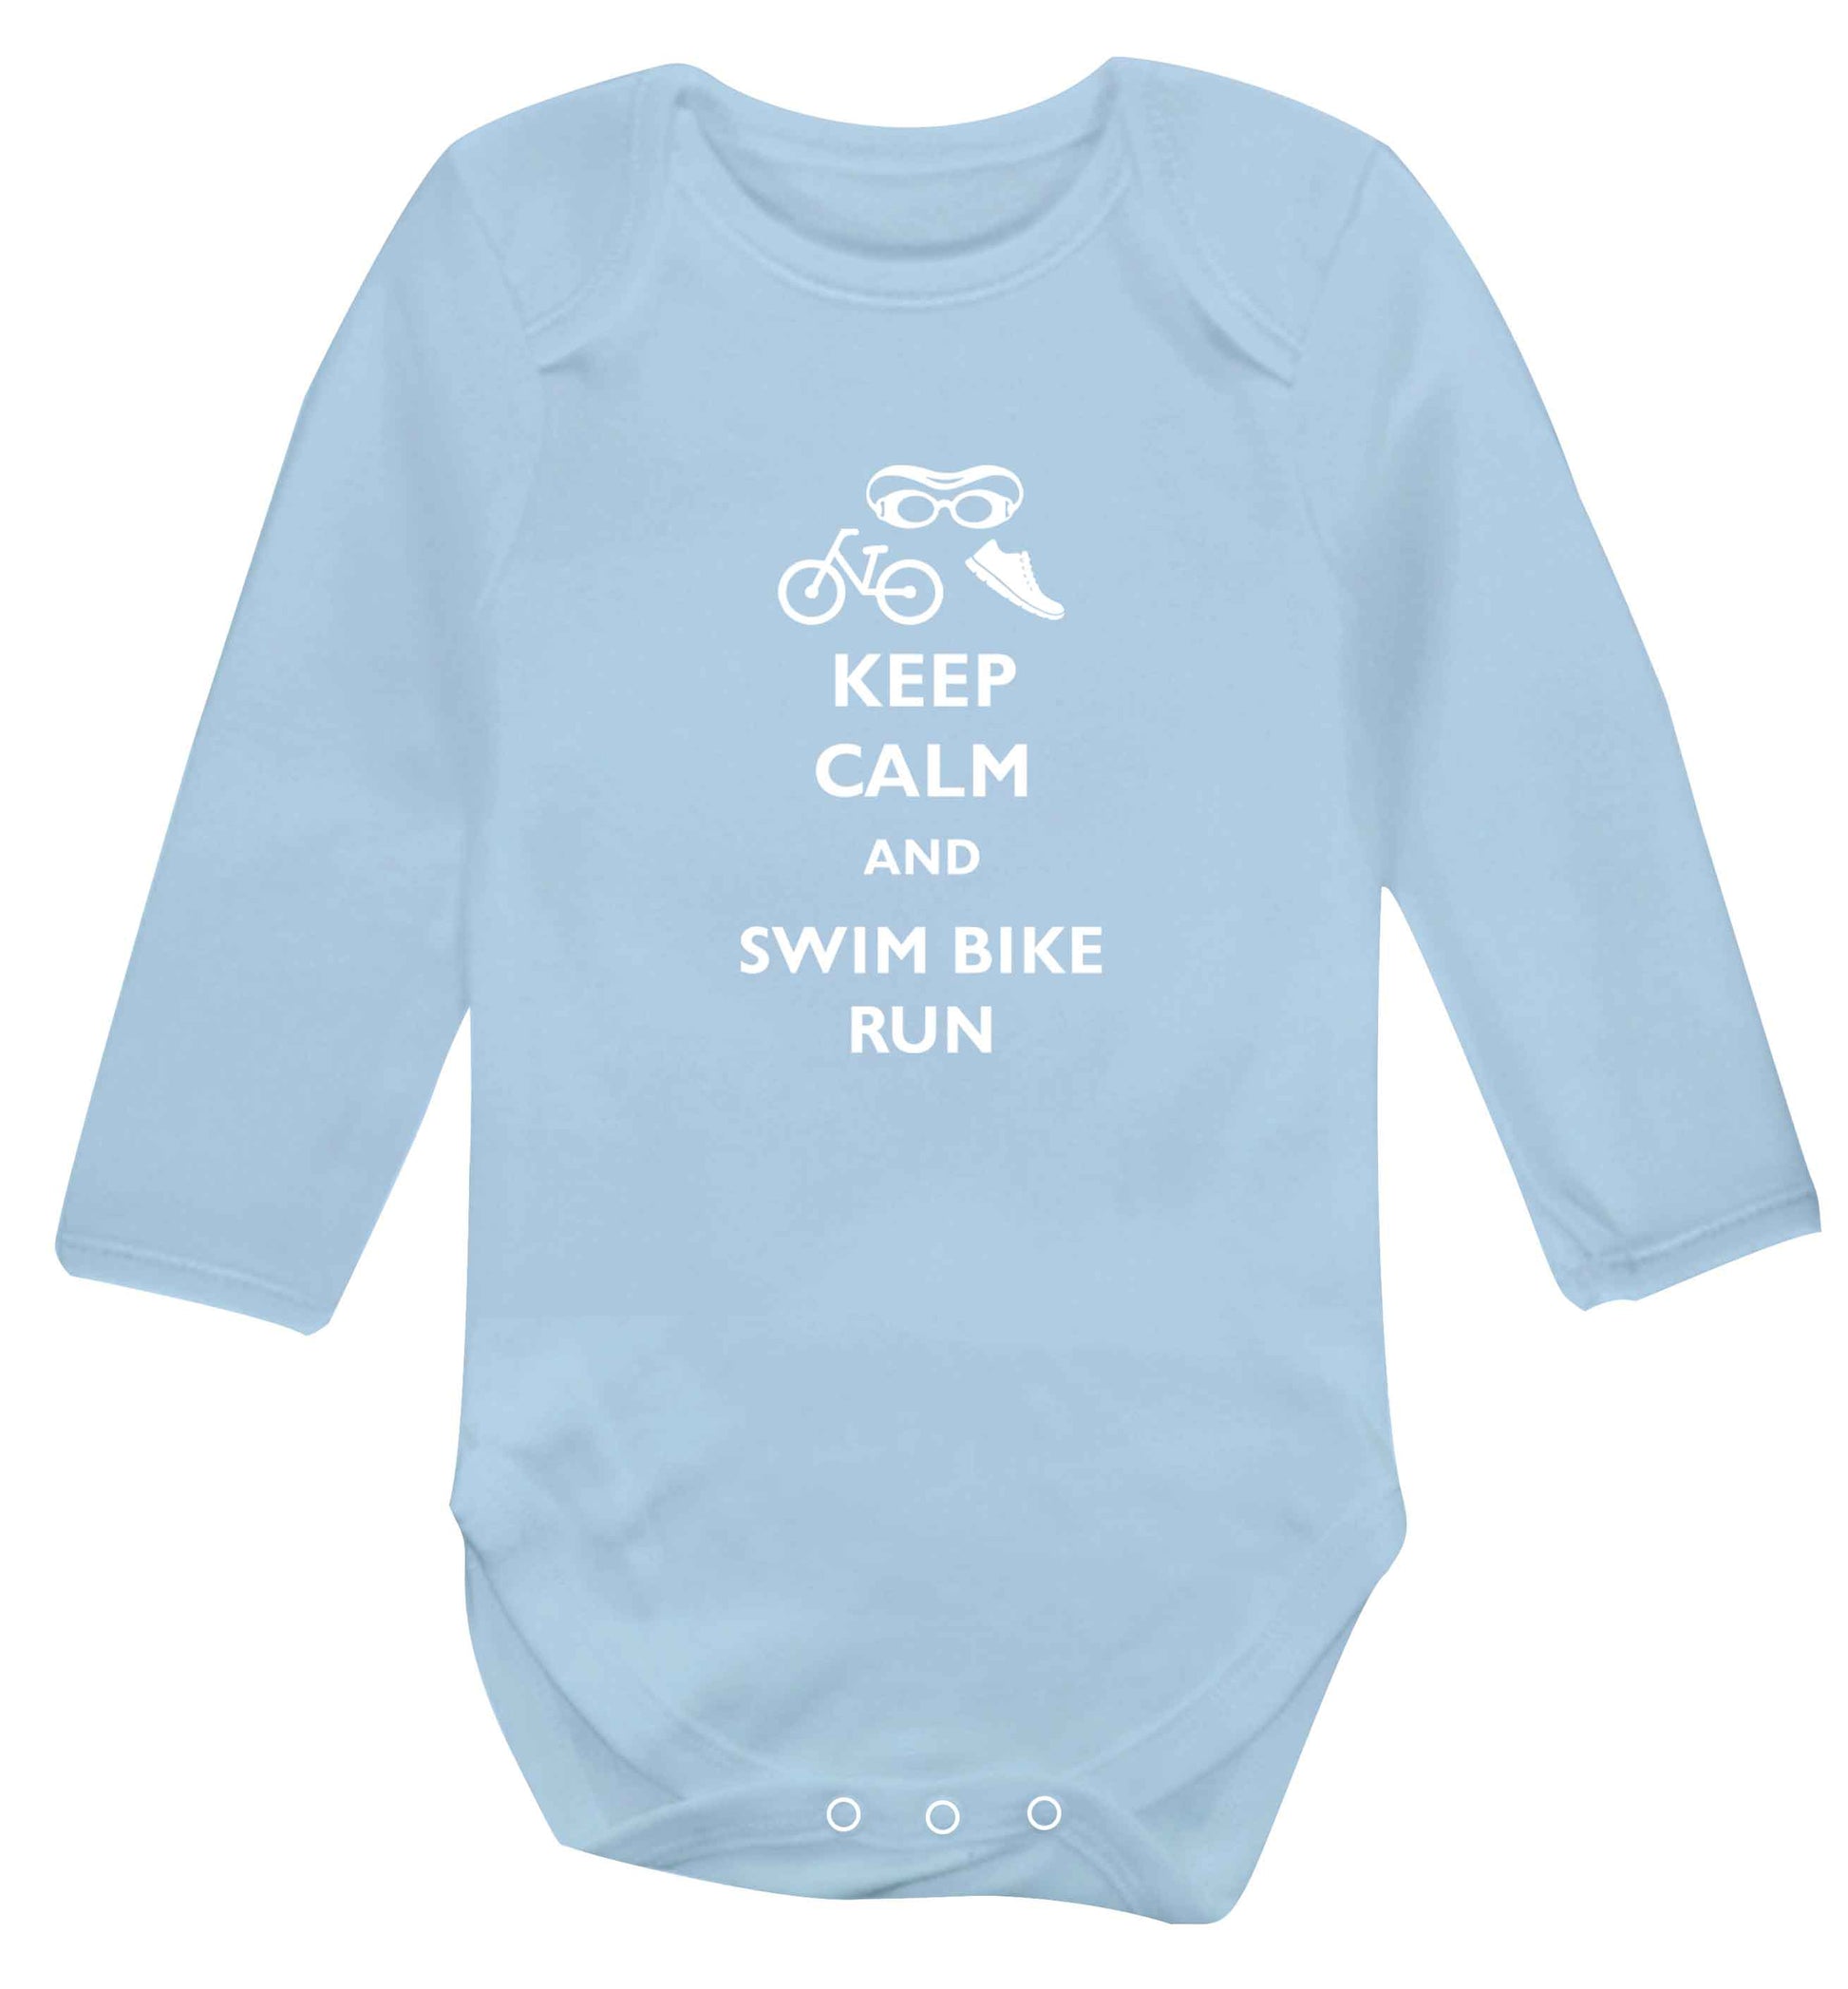 Keep calm and swim bike run baby vest long sleeved pale blue 6-12 months